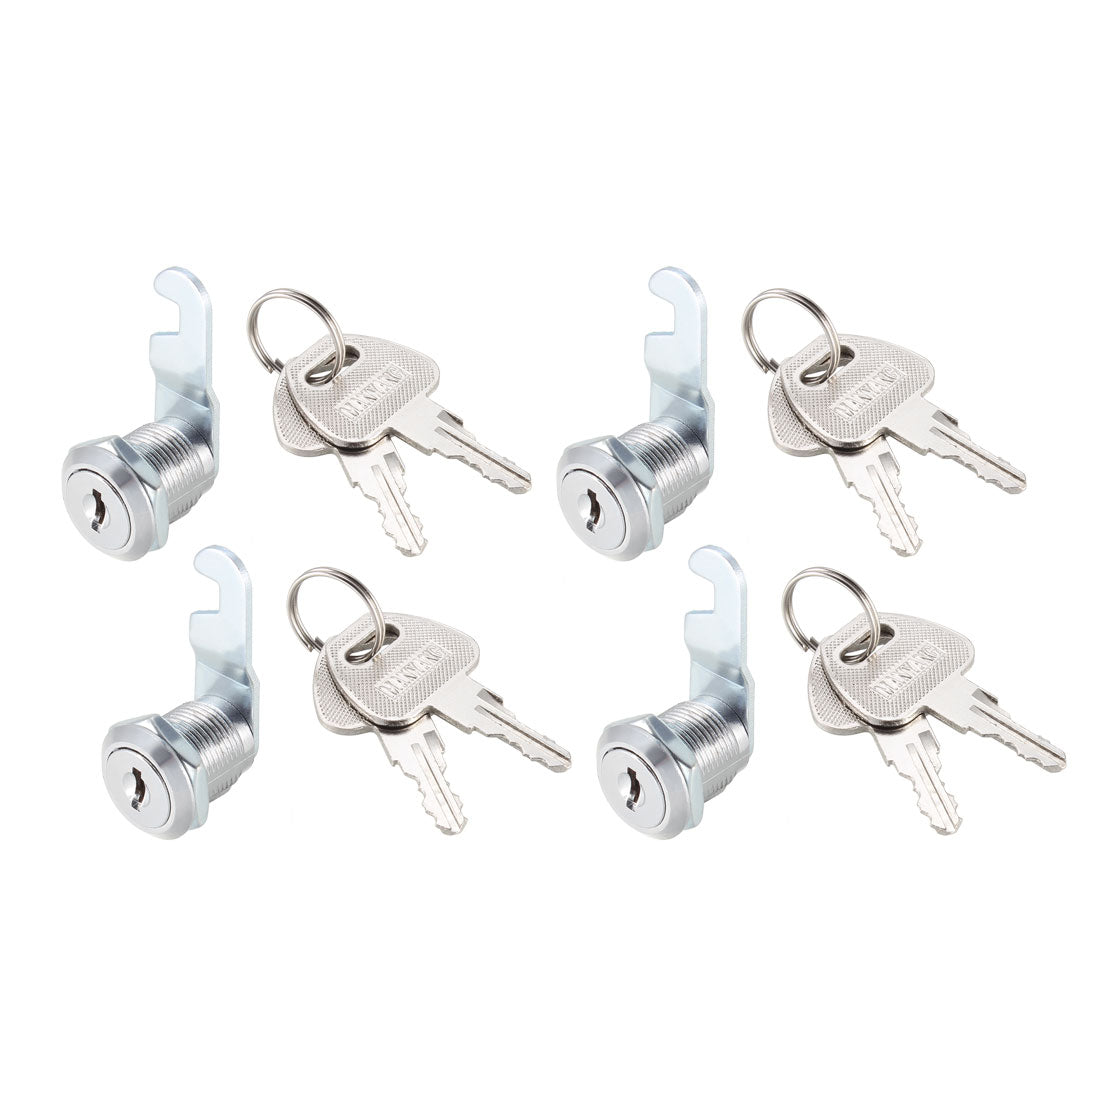 Uxcell Uxcell Cam Locks 20mm Cylinder Length for Max 1/2-inch Panel Keyed Different 4Pcs